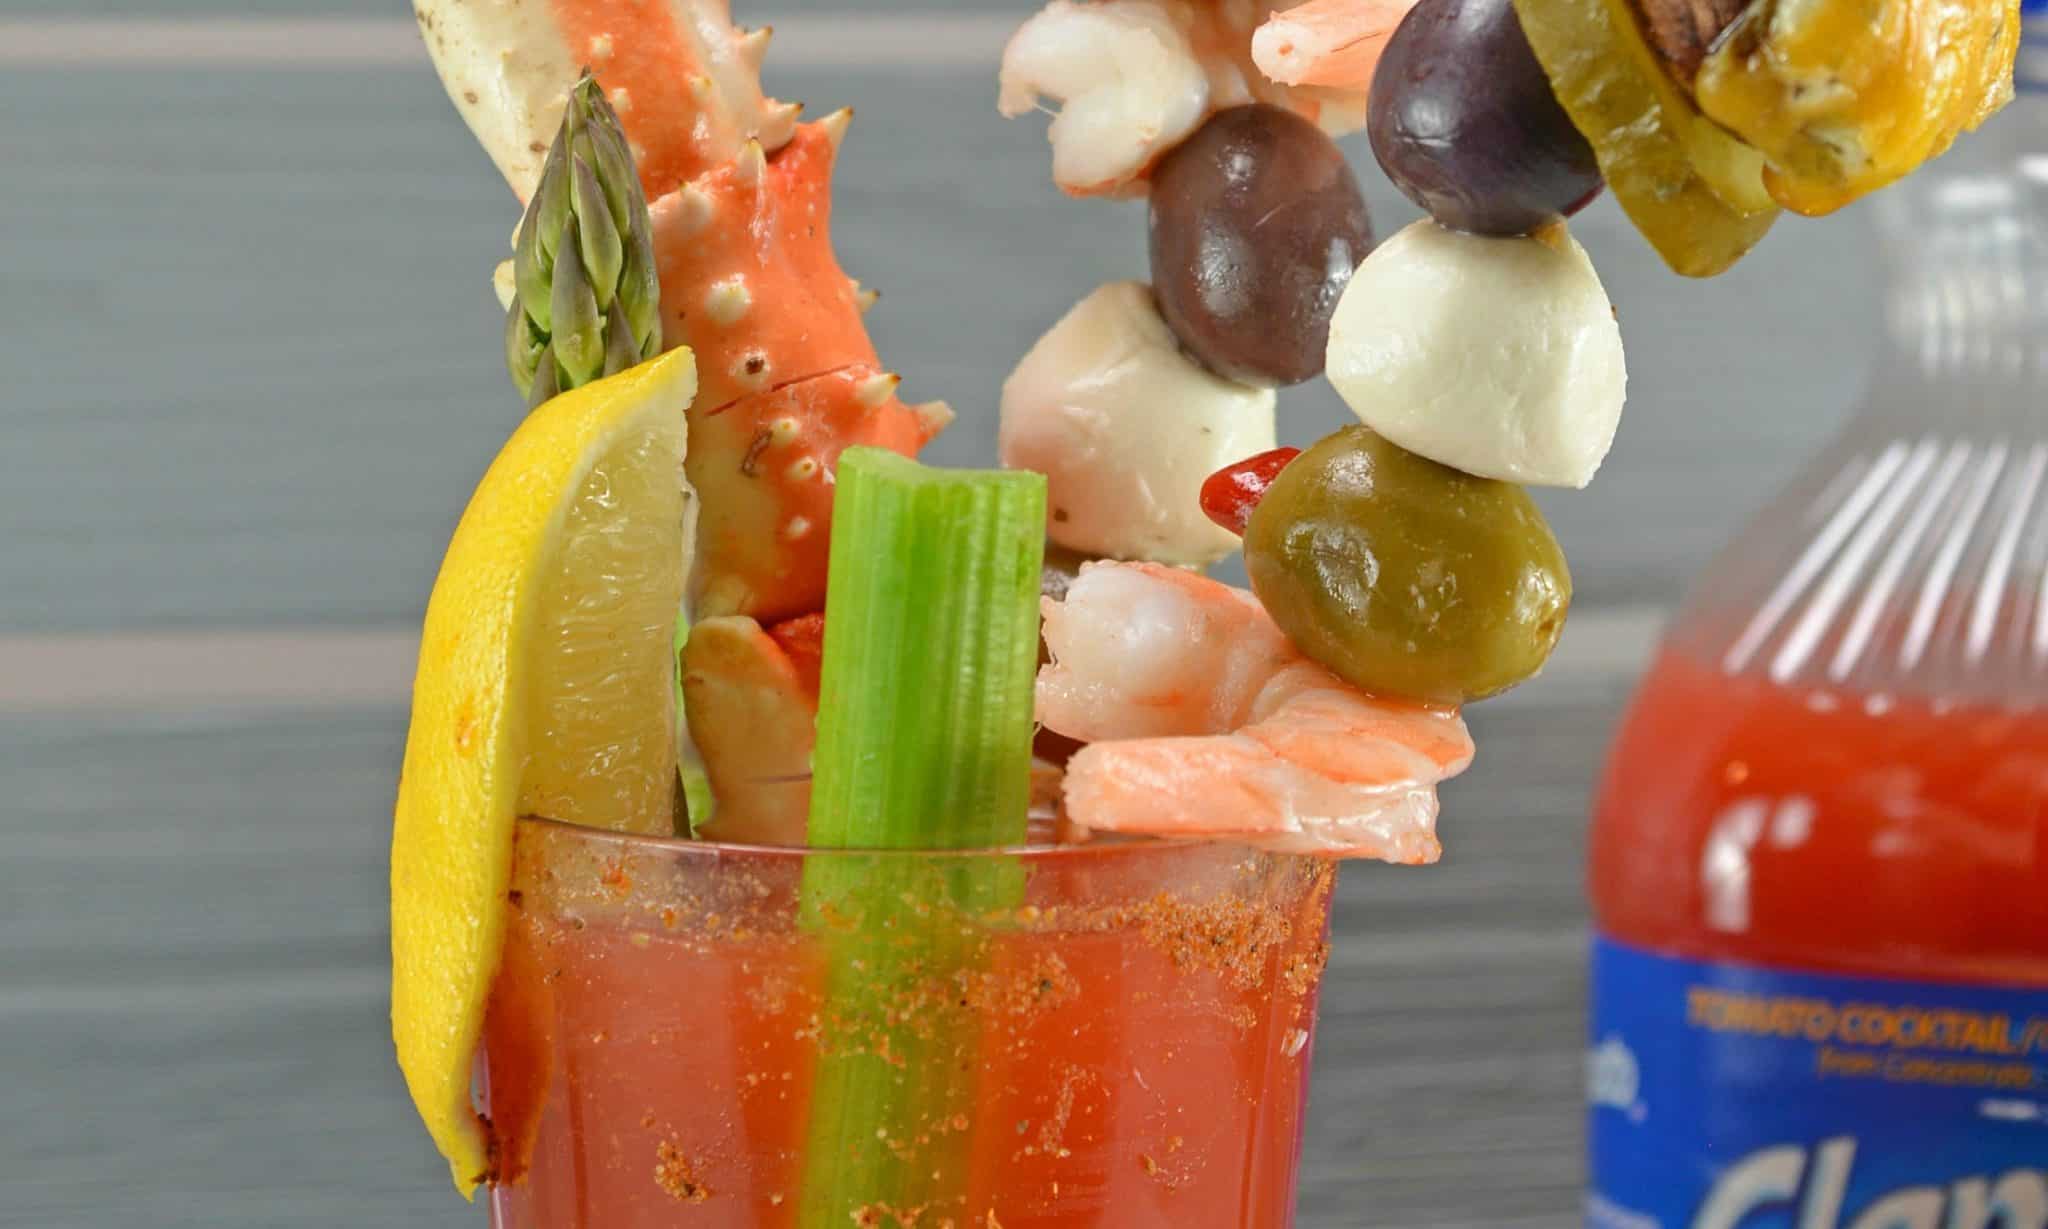 A Clamato Michelada is the perfect party beverage blending Clamato juice with beer, hot sauce and spices to create a refreshing drink for brunches and celebrations everywhere!